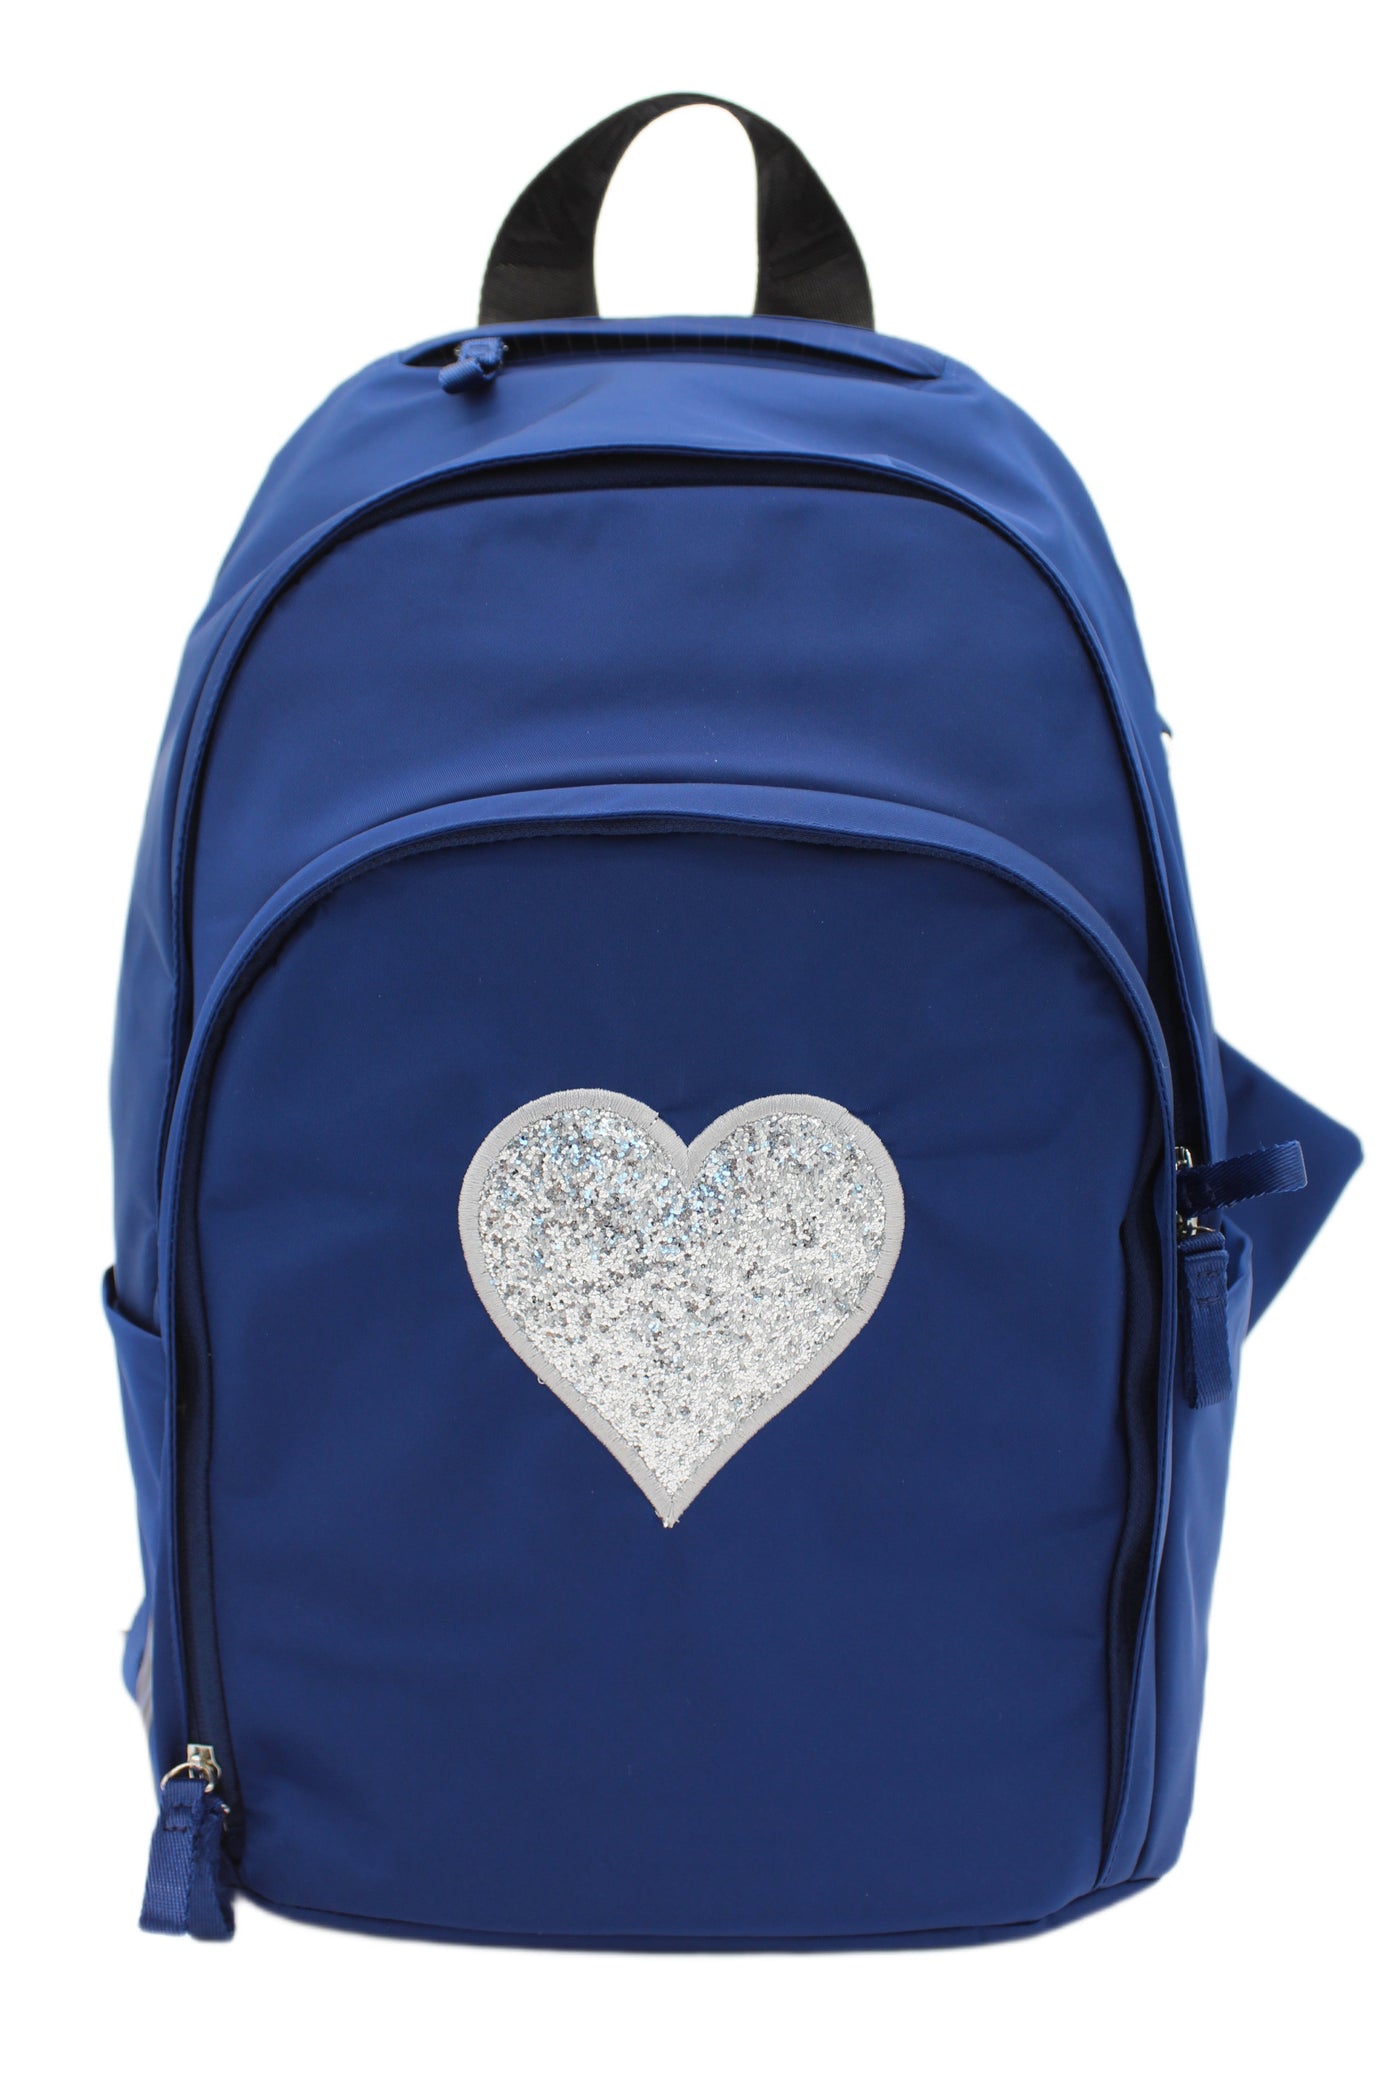 Novelty Delaire Backpack - “Heart” (custom embroidered - allow an additional 5 business days to ship)